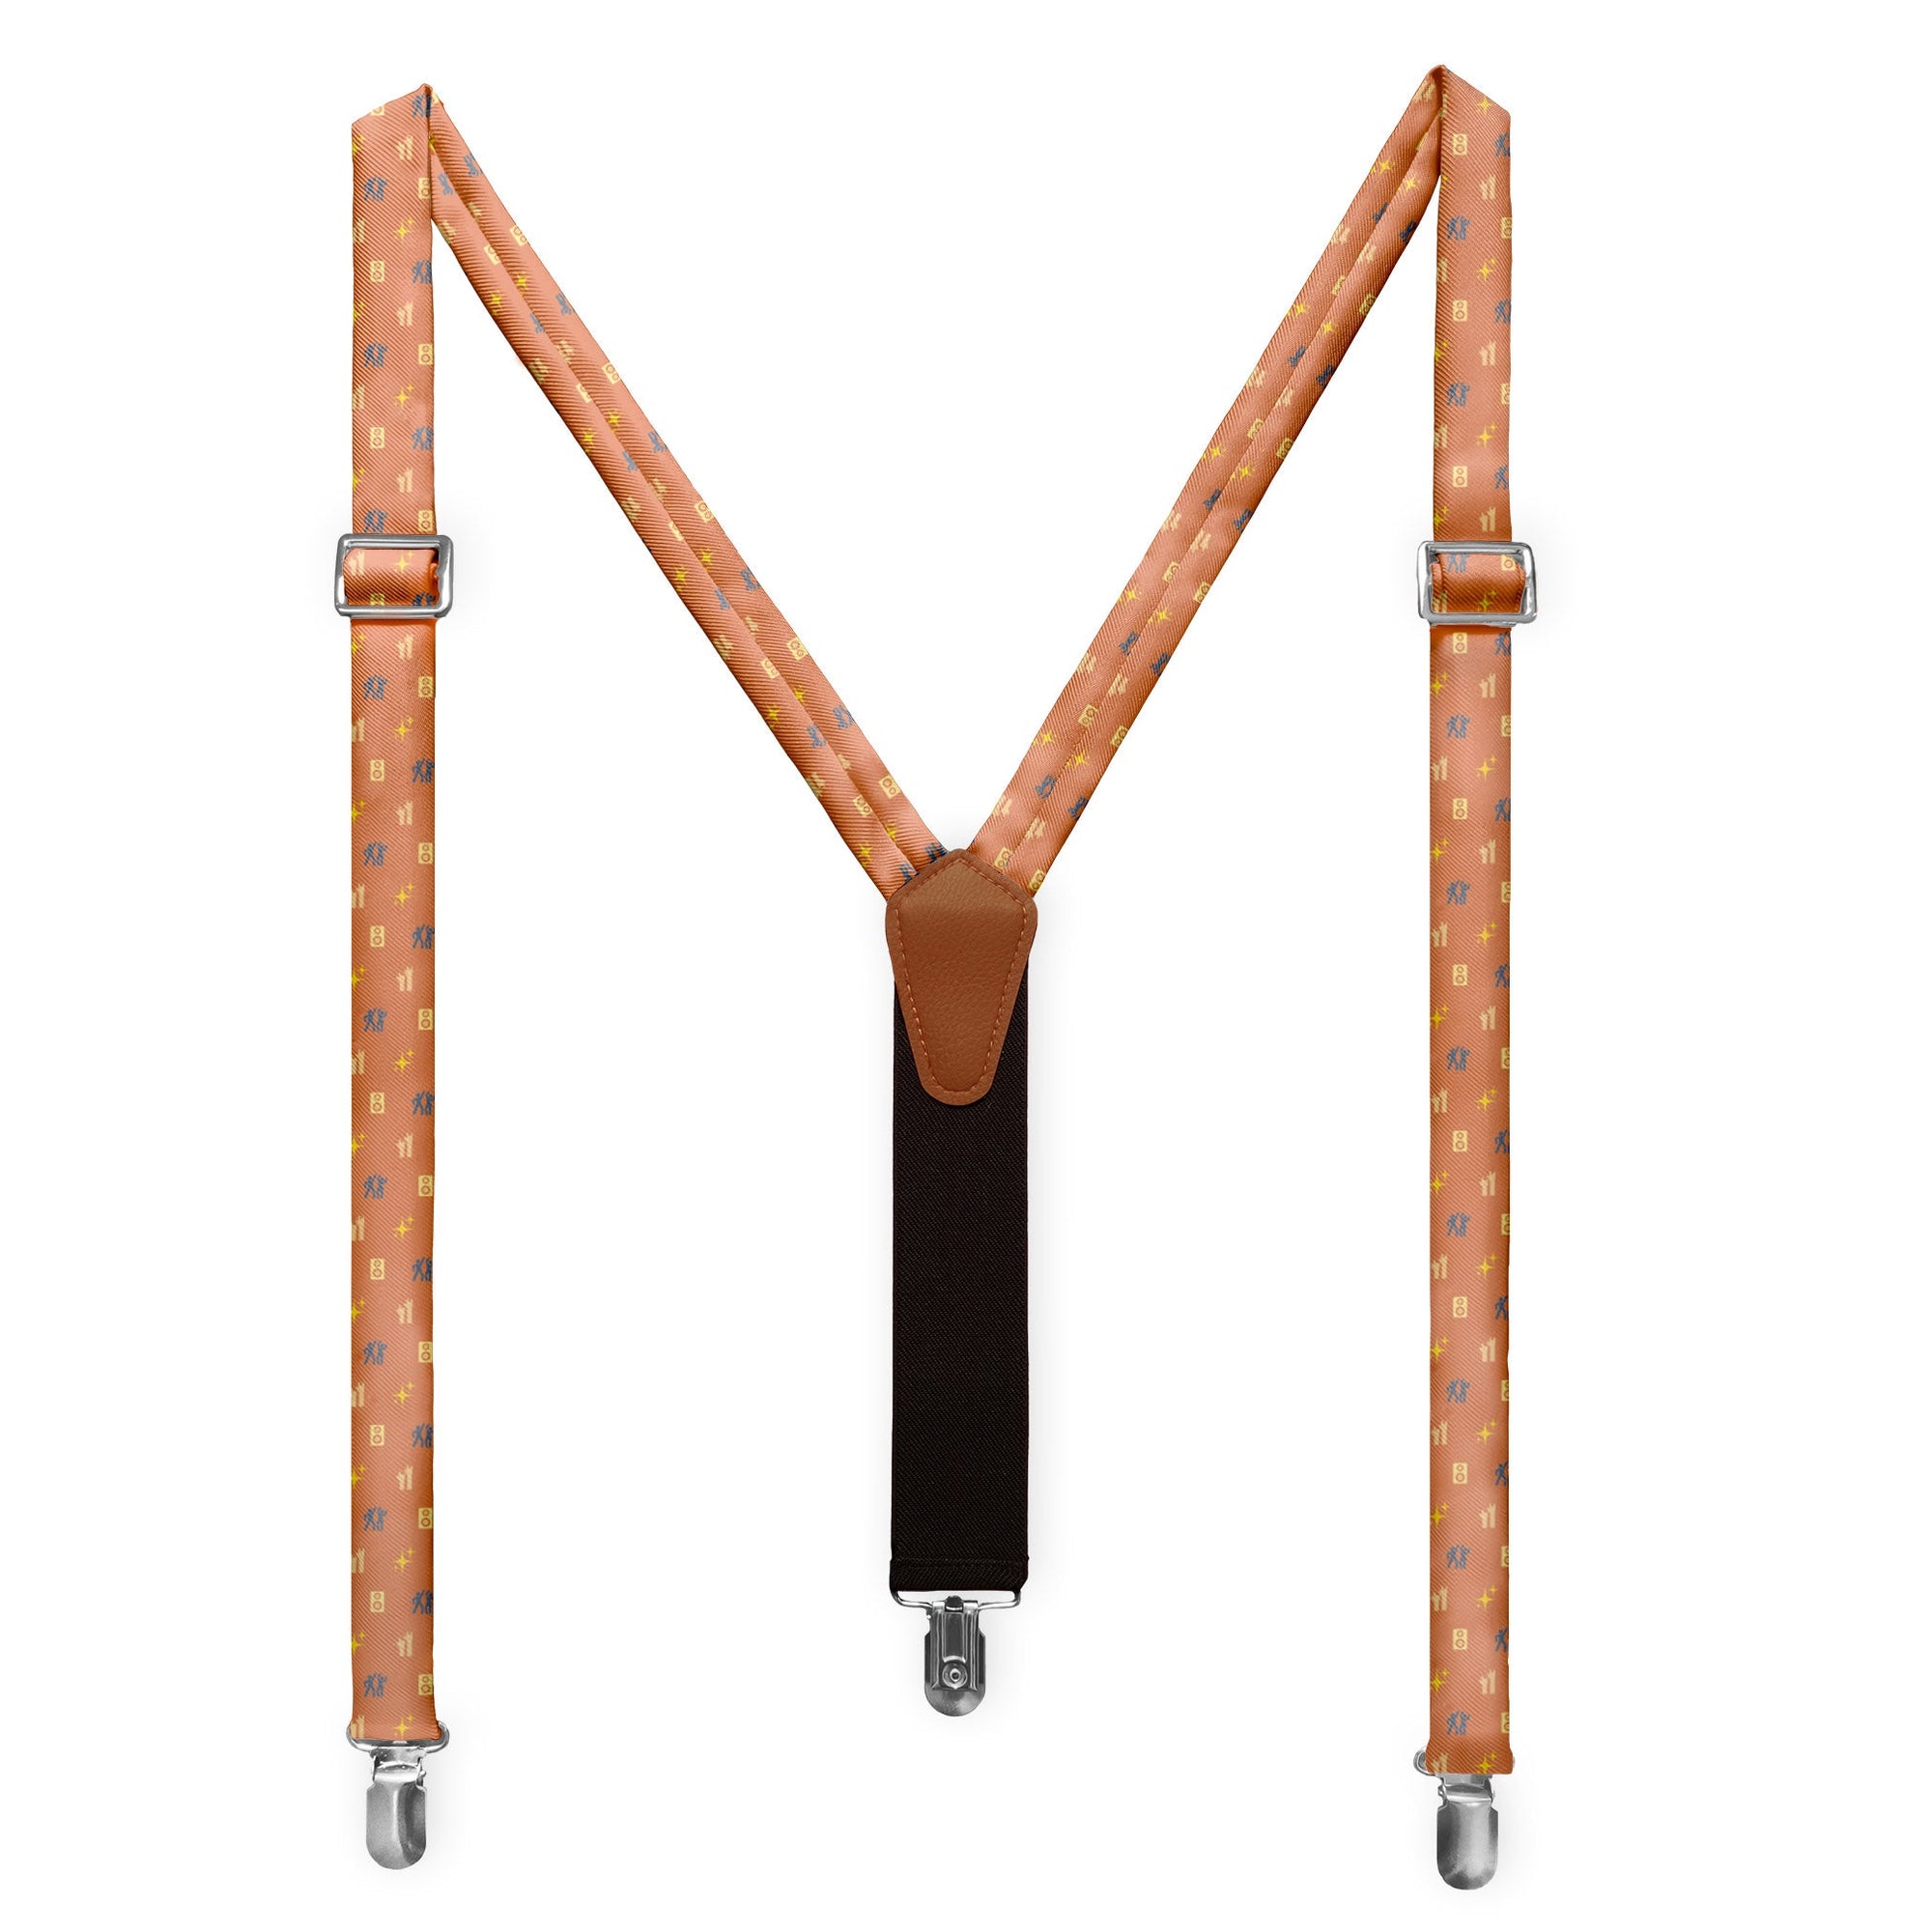 Concerts with Friends Suspenders -  -  - Knotty Tie Co.